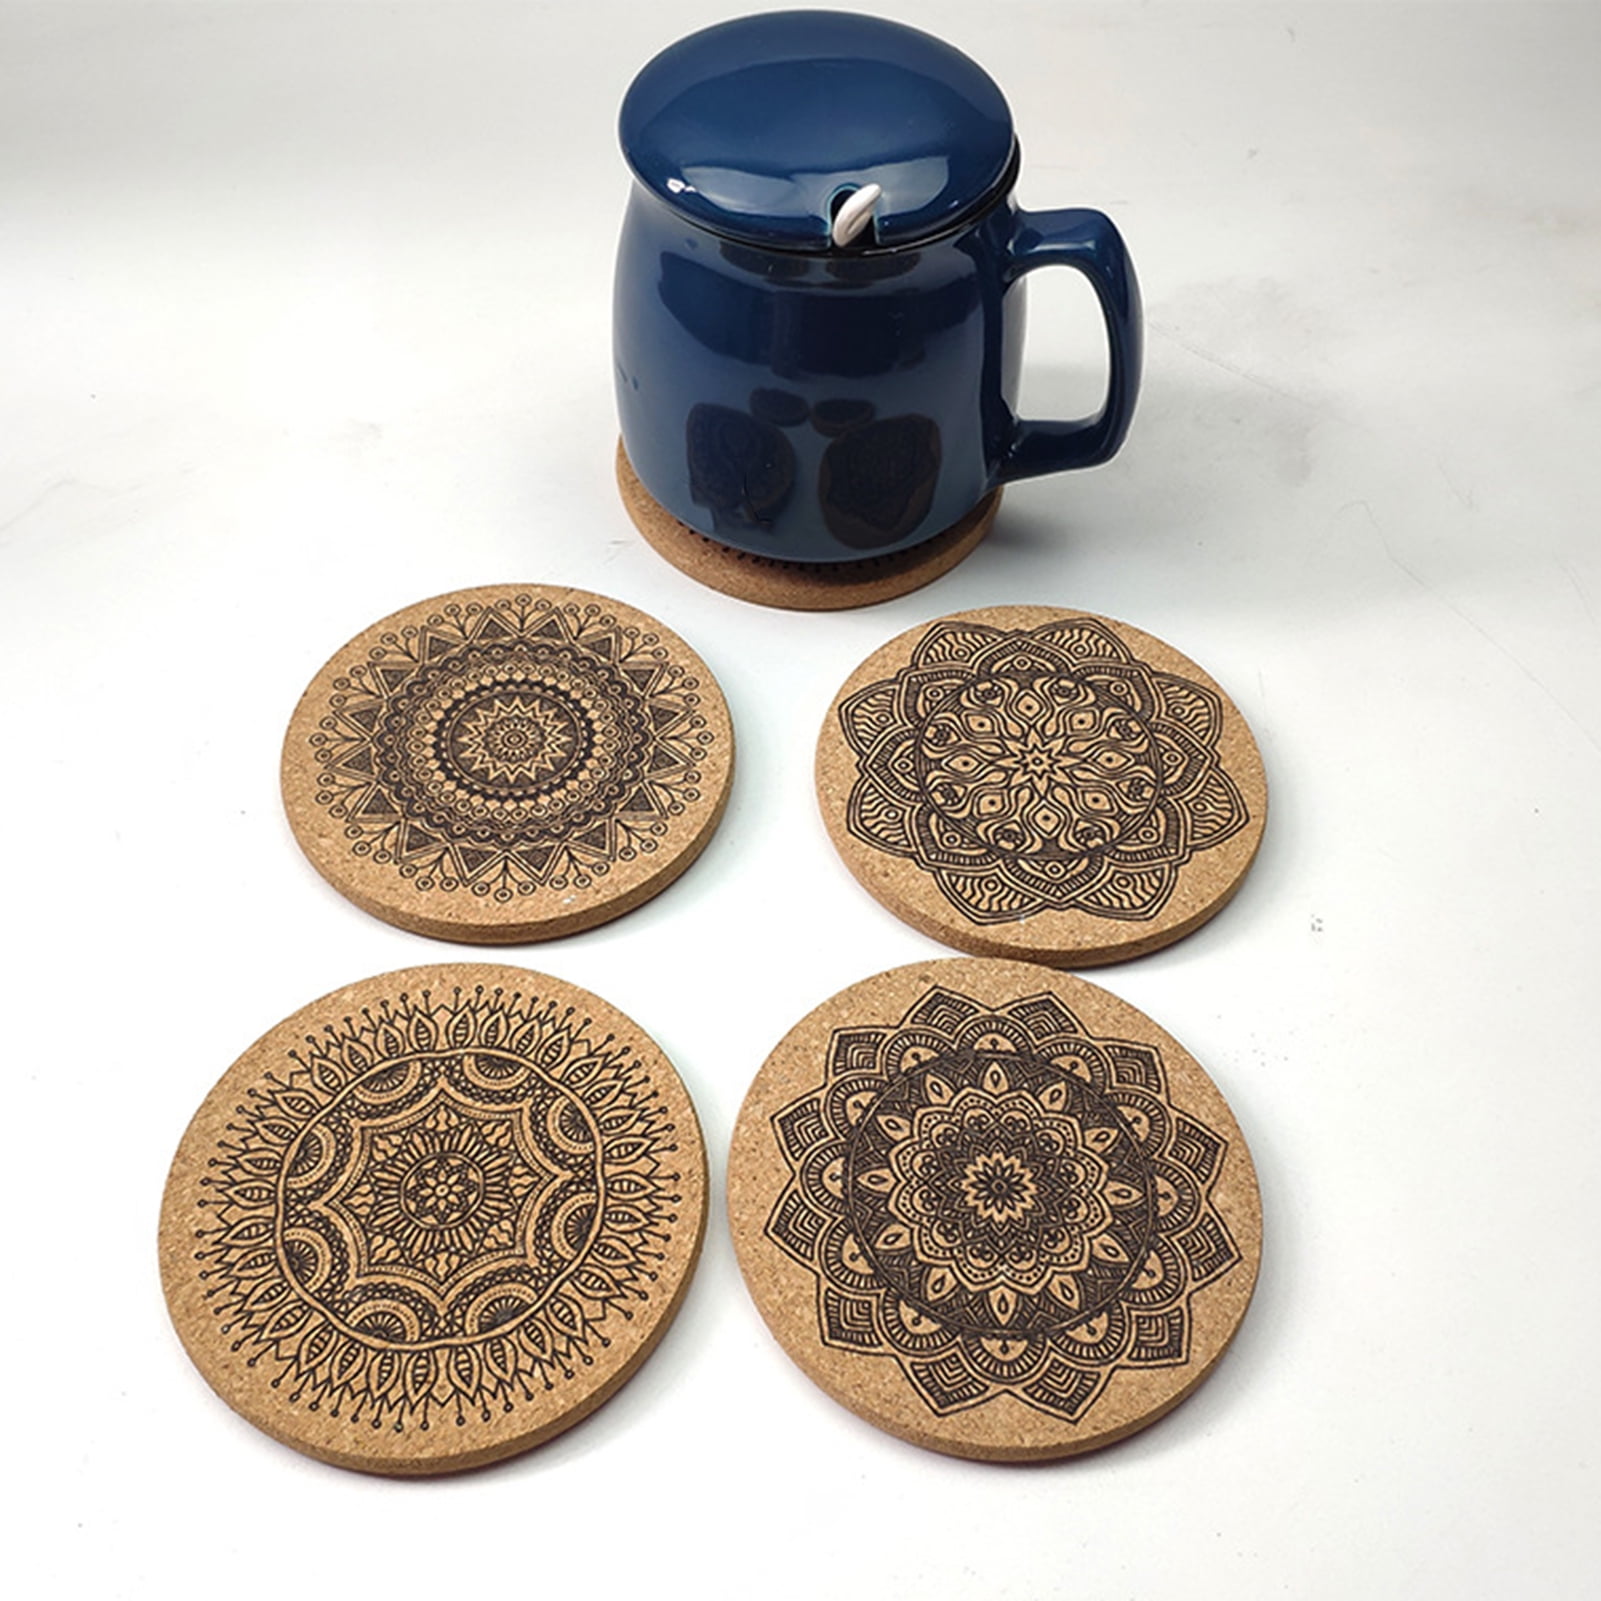 Sublimation Blanks Coasters for Drinks, Ceramic Drink Coaster with Cork  Backing Pads Heat Transfer Cup Coaster for DIY Crafts Painting Home Decor